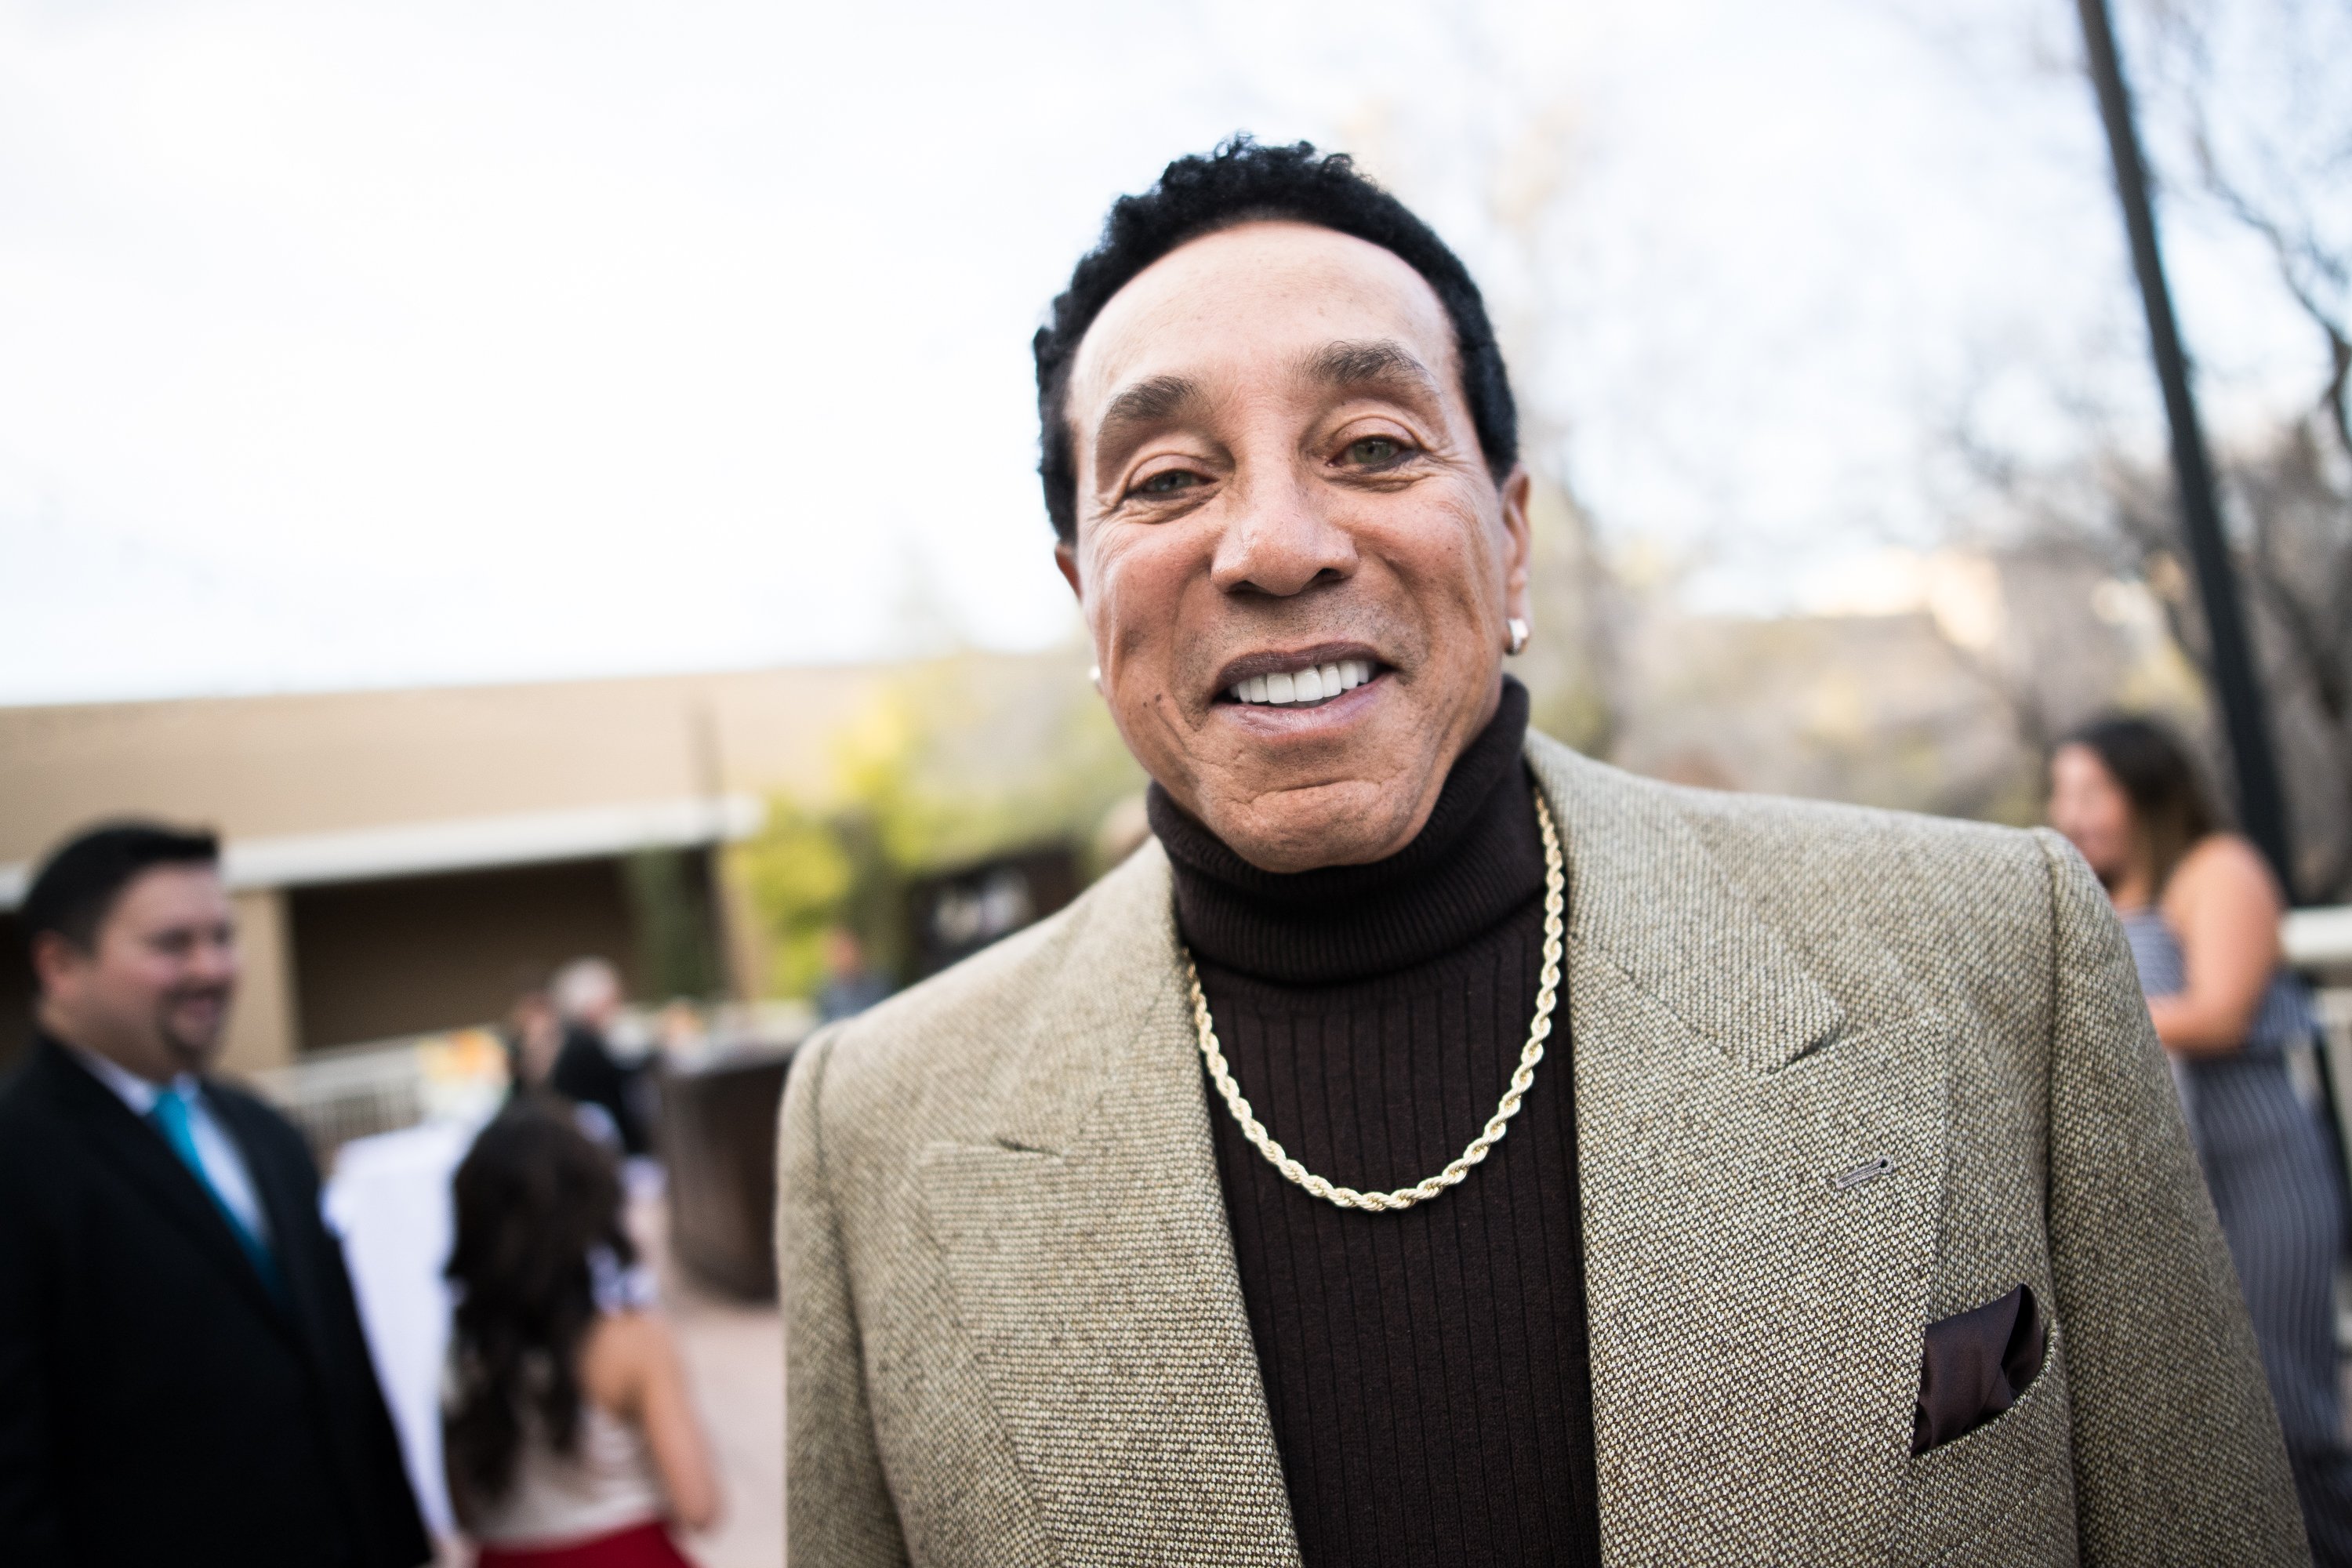 Smokey Robinson attends the Celebrity Fight Night's Founders Club Dinner in Phoenix on March 9, 2018 | Photo: Getty Images